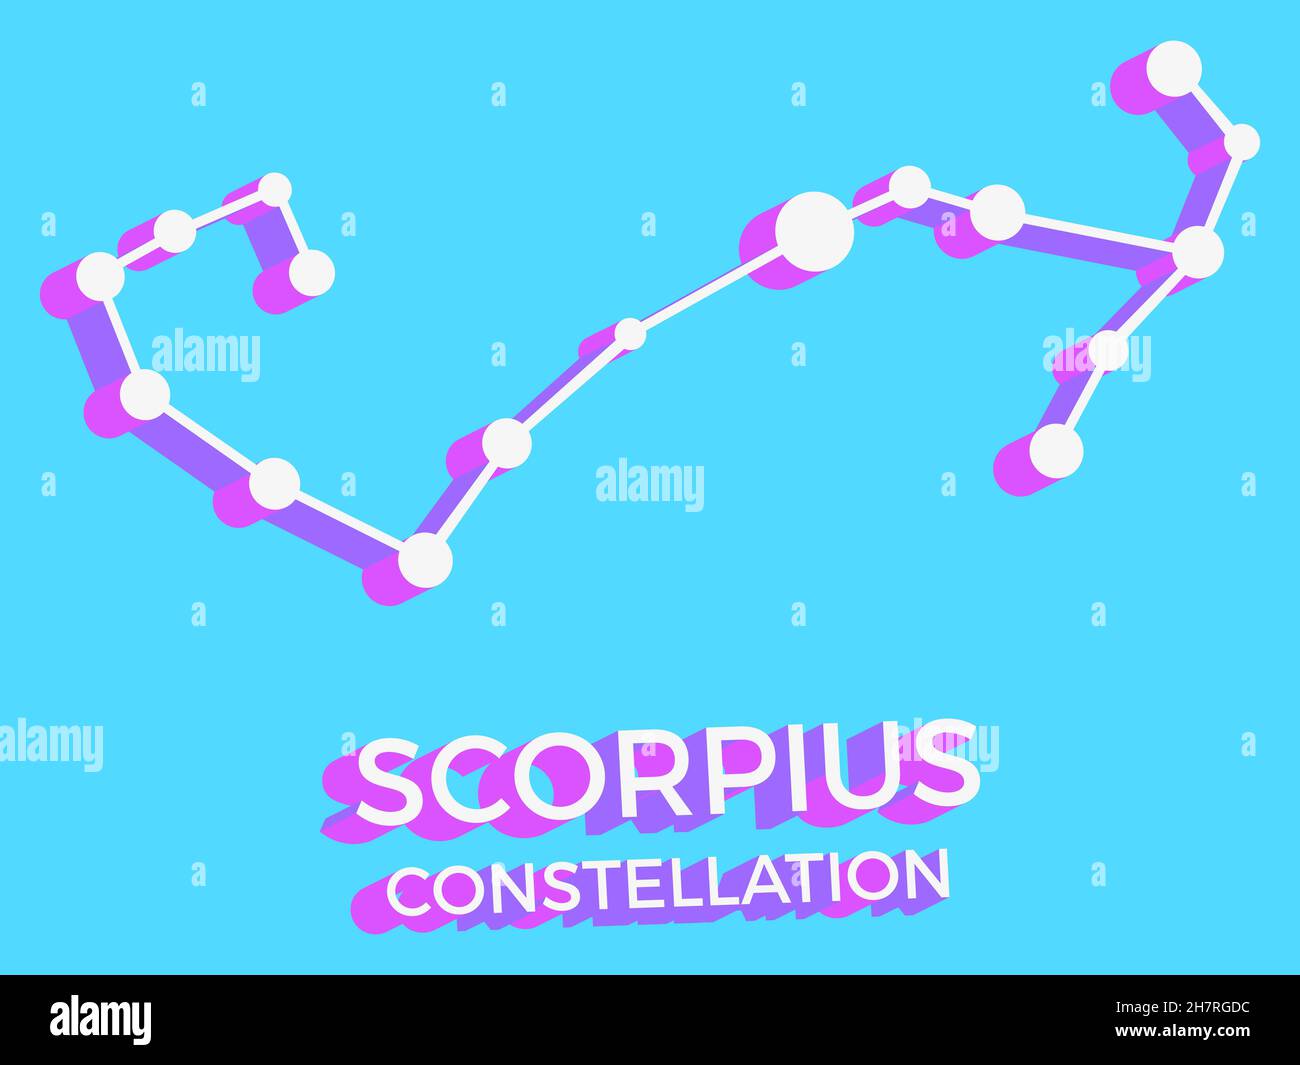 Scorpius constellation 3d symbol. Constellation icon in isometric style on blue background. Cluster of stars and galaxies. Vector illustration Stock Vector